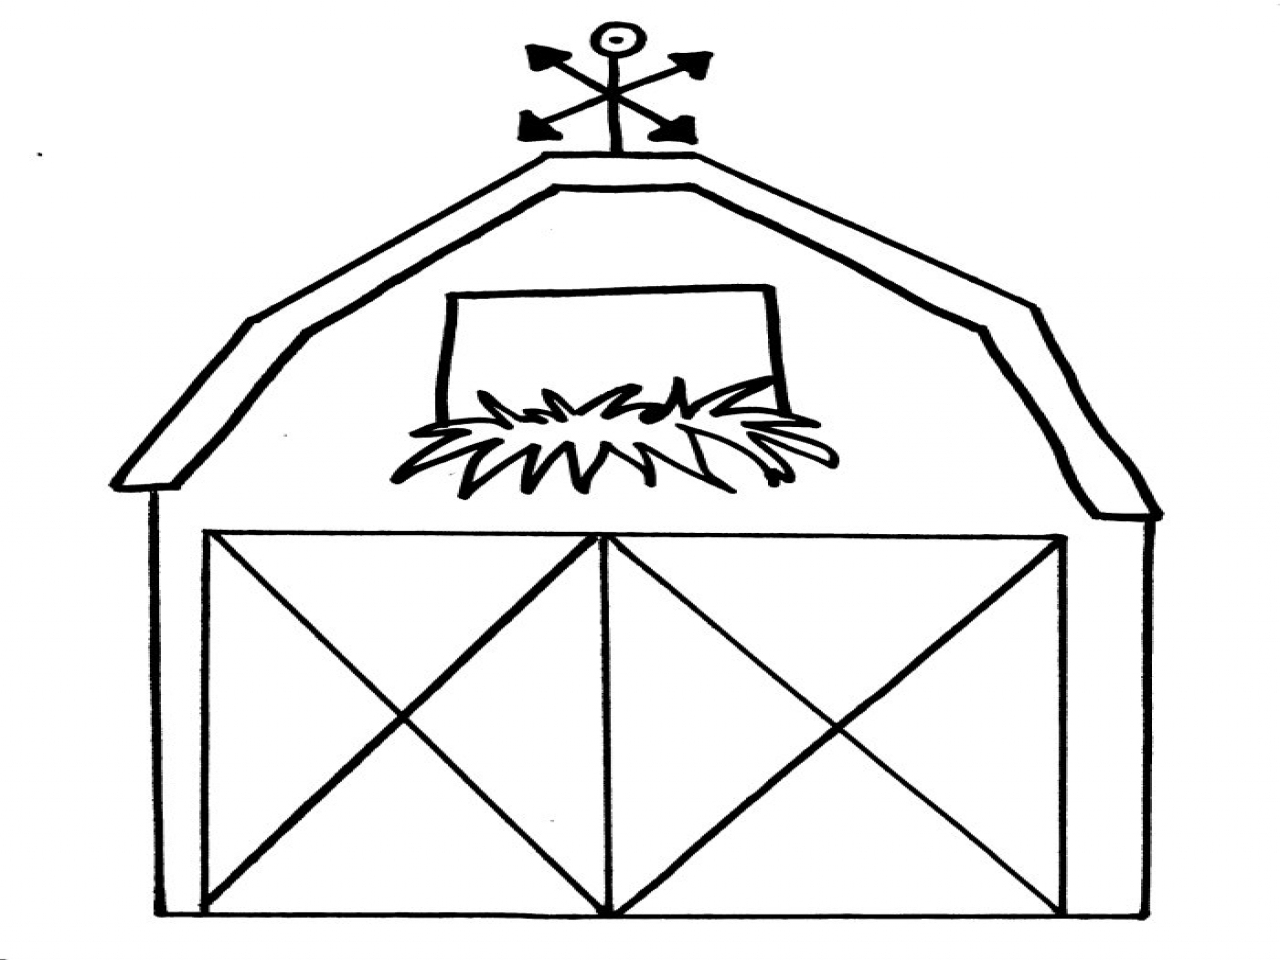 Barn Coloring Pages - Printable Coloring Image - Free Printable Barn Coloring Pages